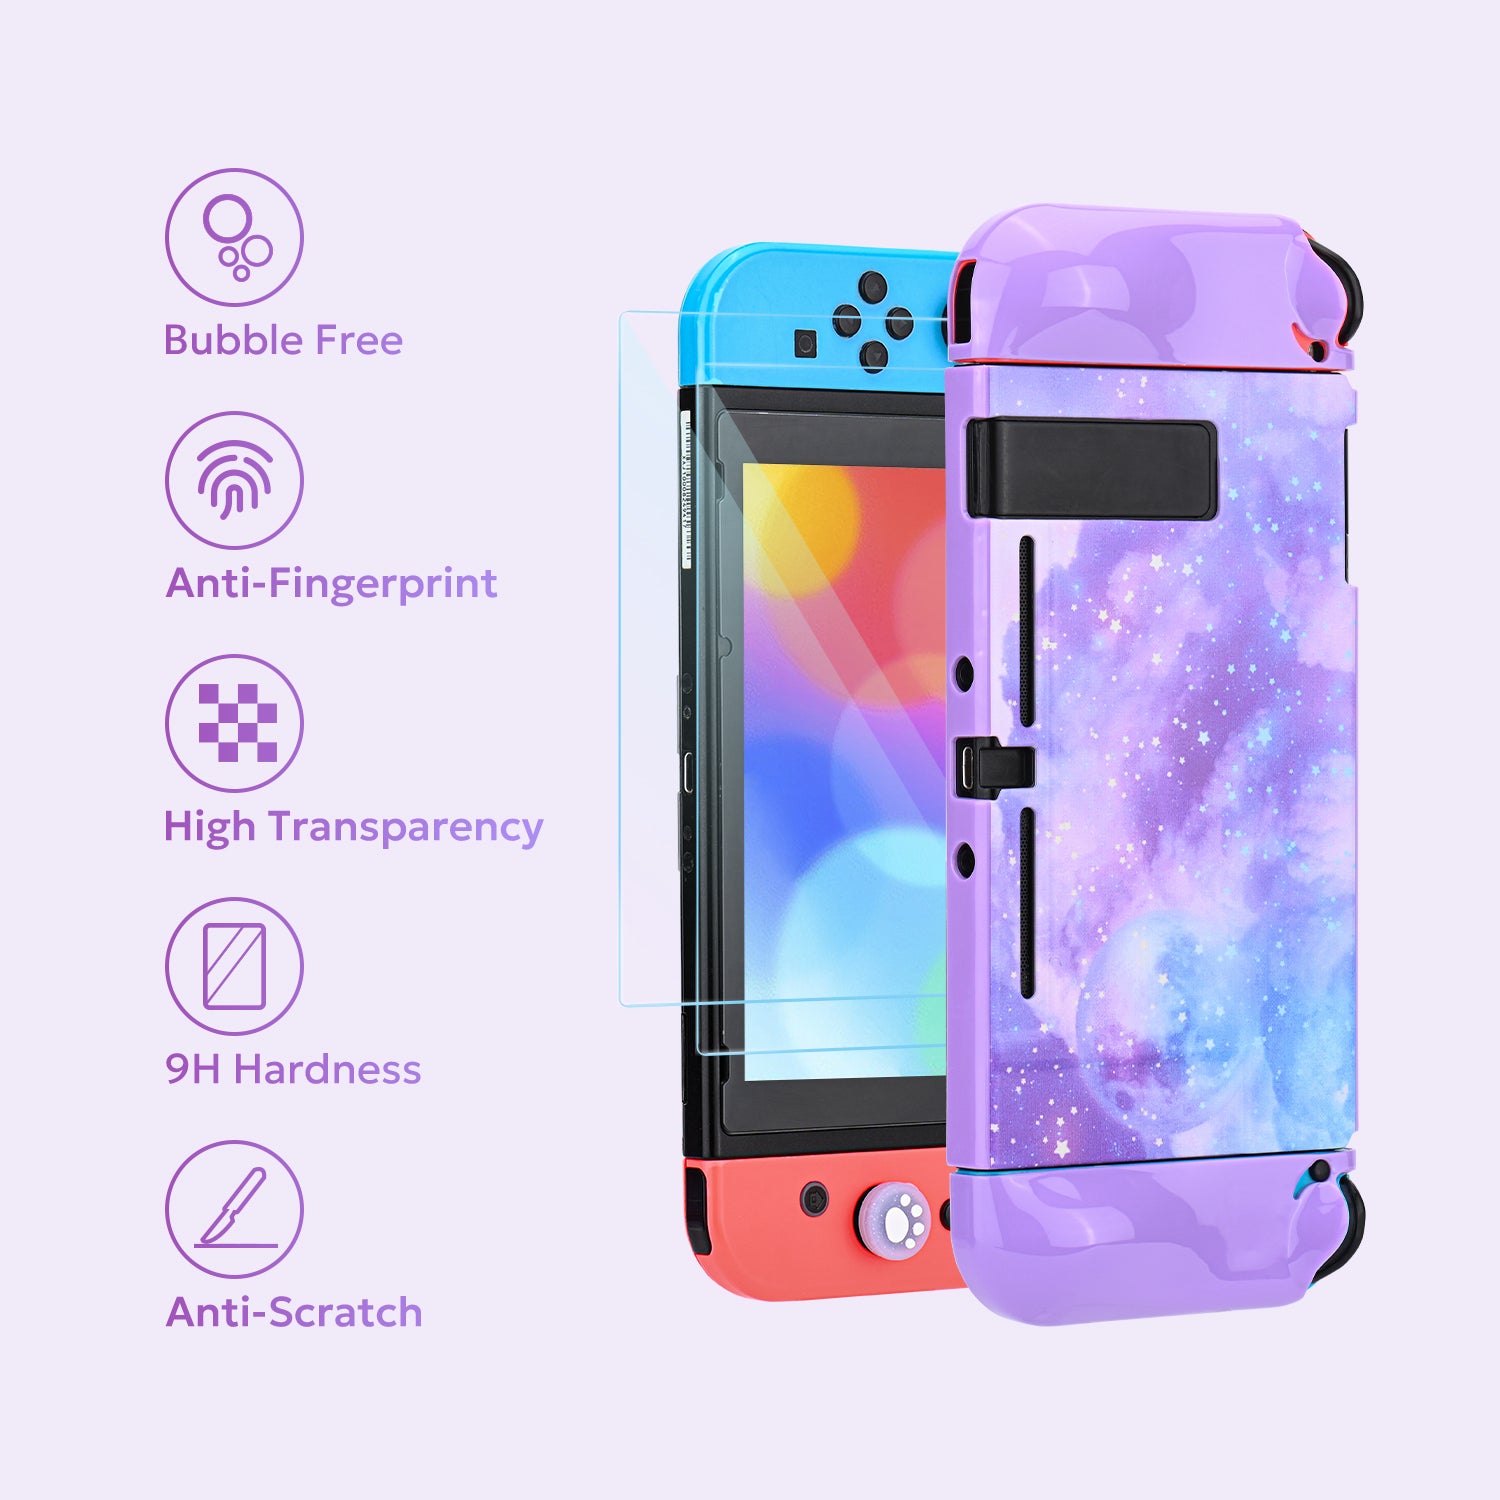 innoAura Galaxy Switch Carrying Case, Switch Case for NS Switch